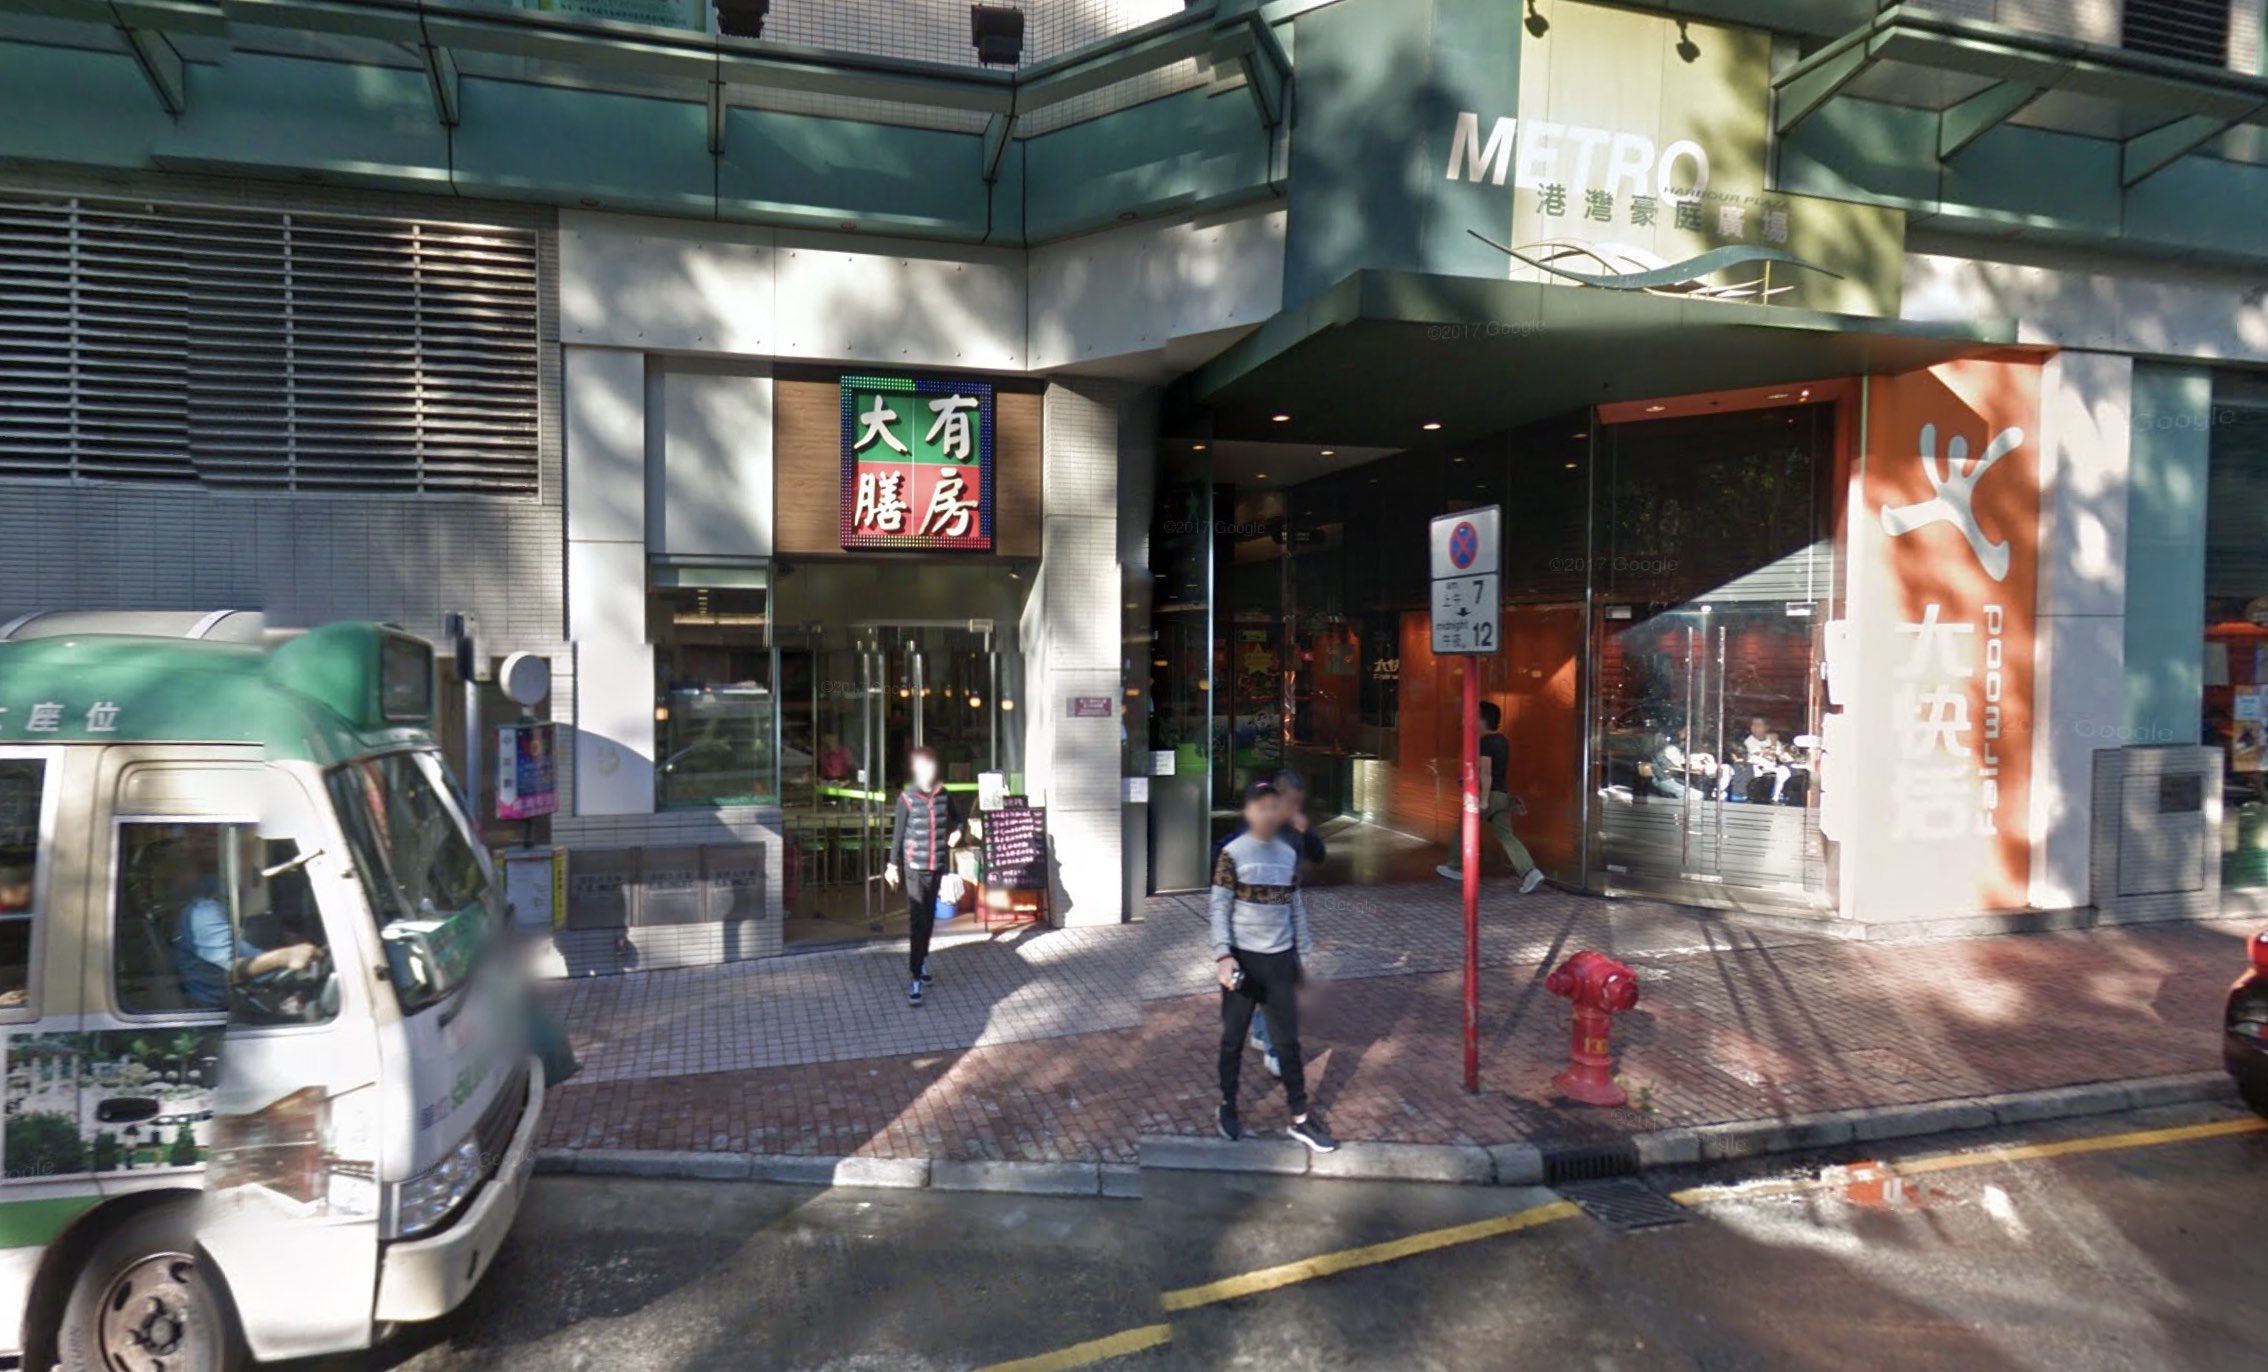 The exterior of Tai Yau, the restaurant that was caught up in a five second flash attack that saw a man throw paint and a hammer at its door. Screenshot via Google Maps.